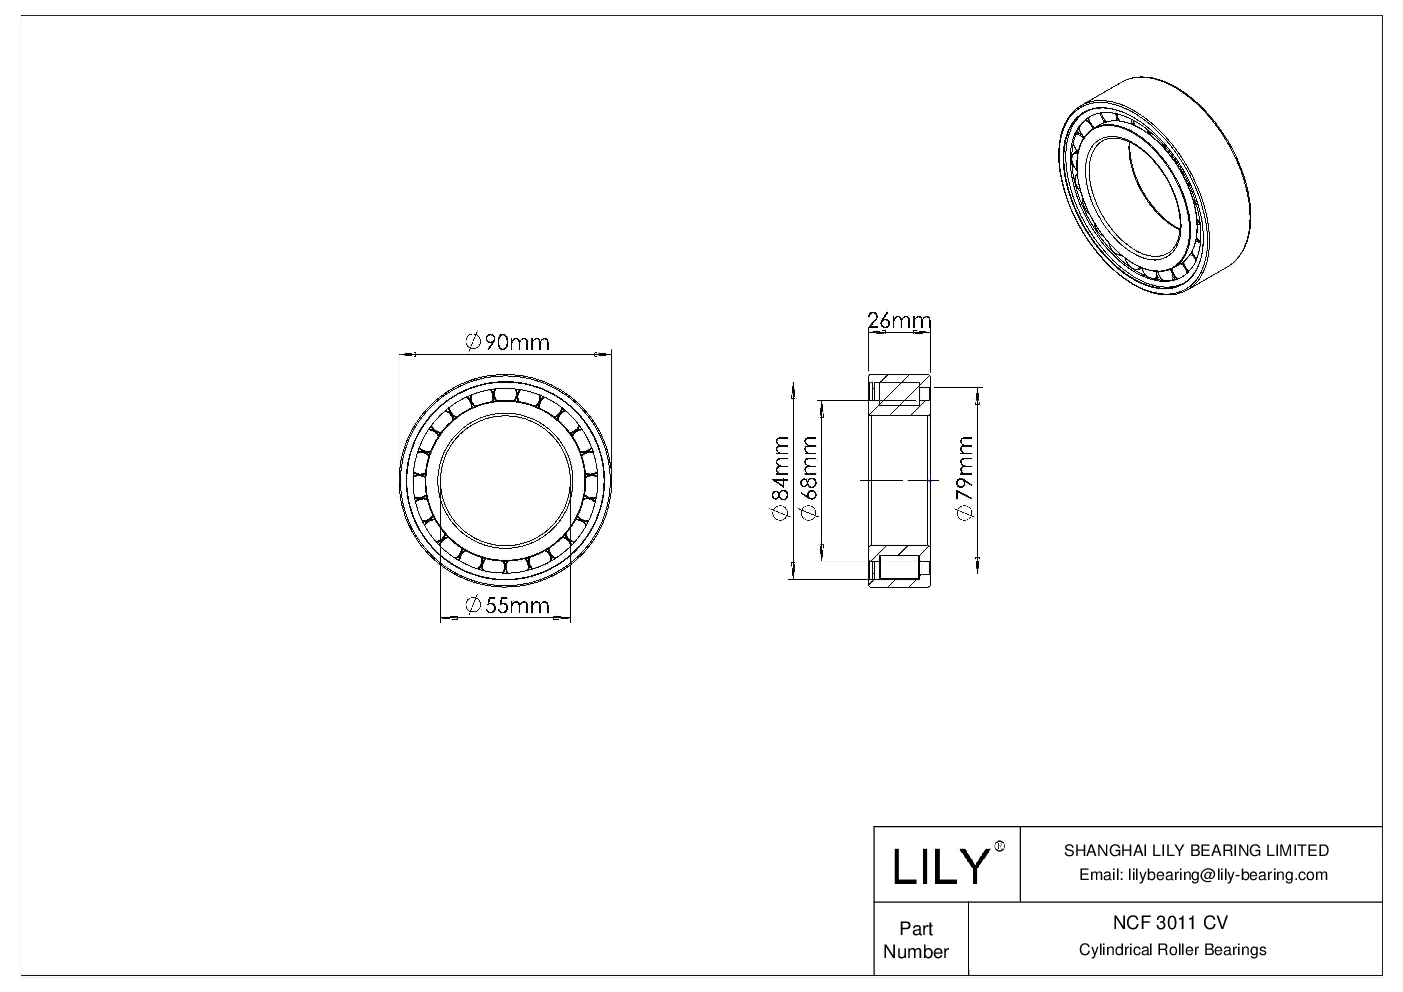 NCF 3011 CV Single Row Full Complement Cylindrical Roller Bearings cad drawing